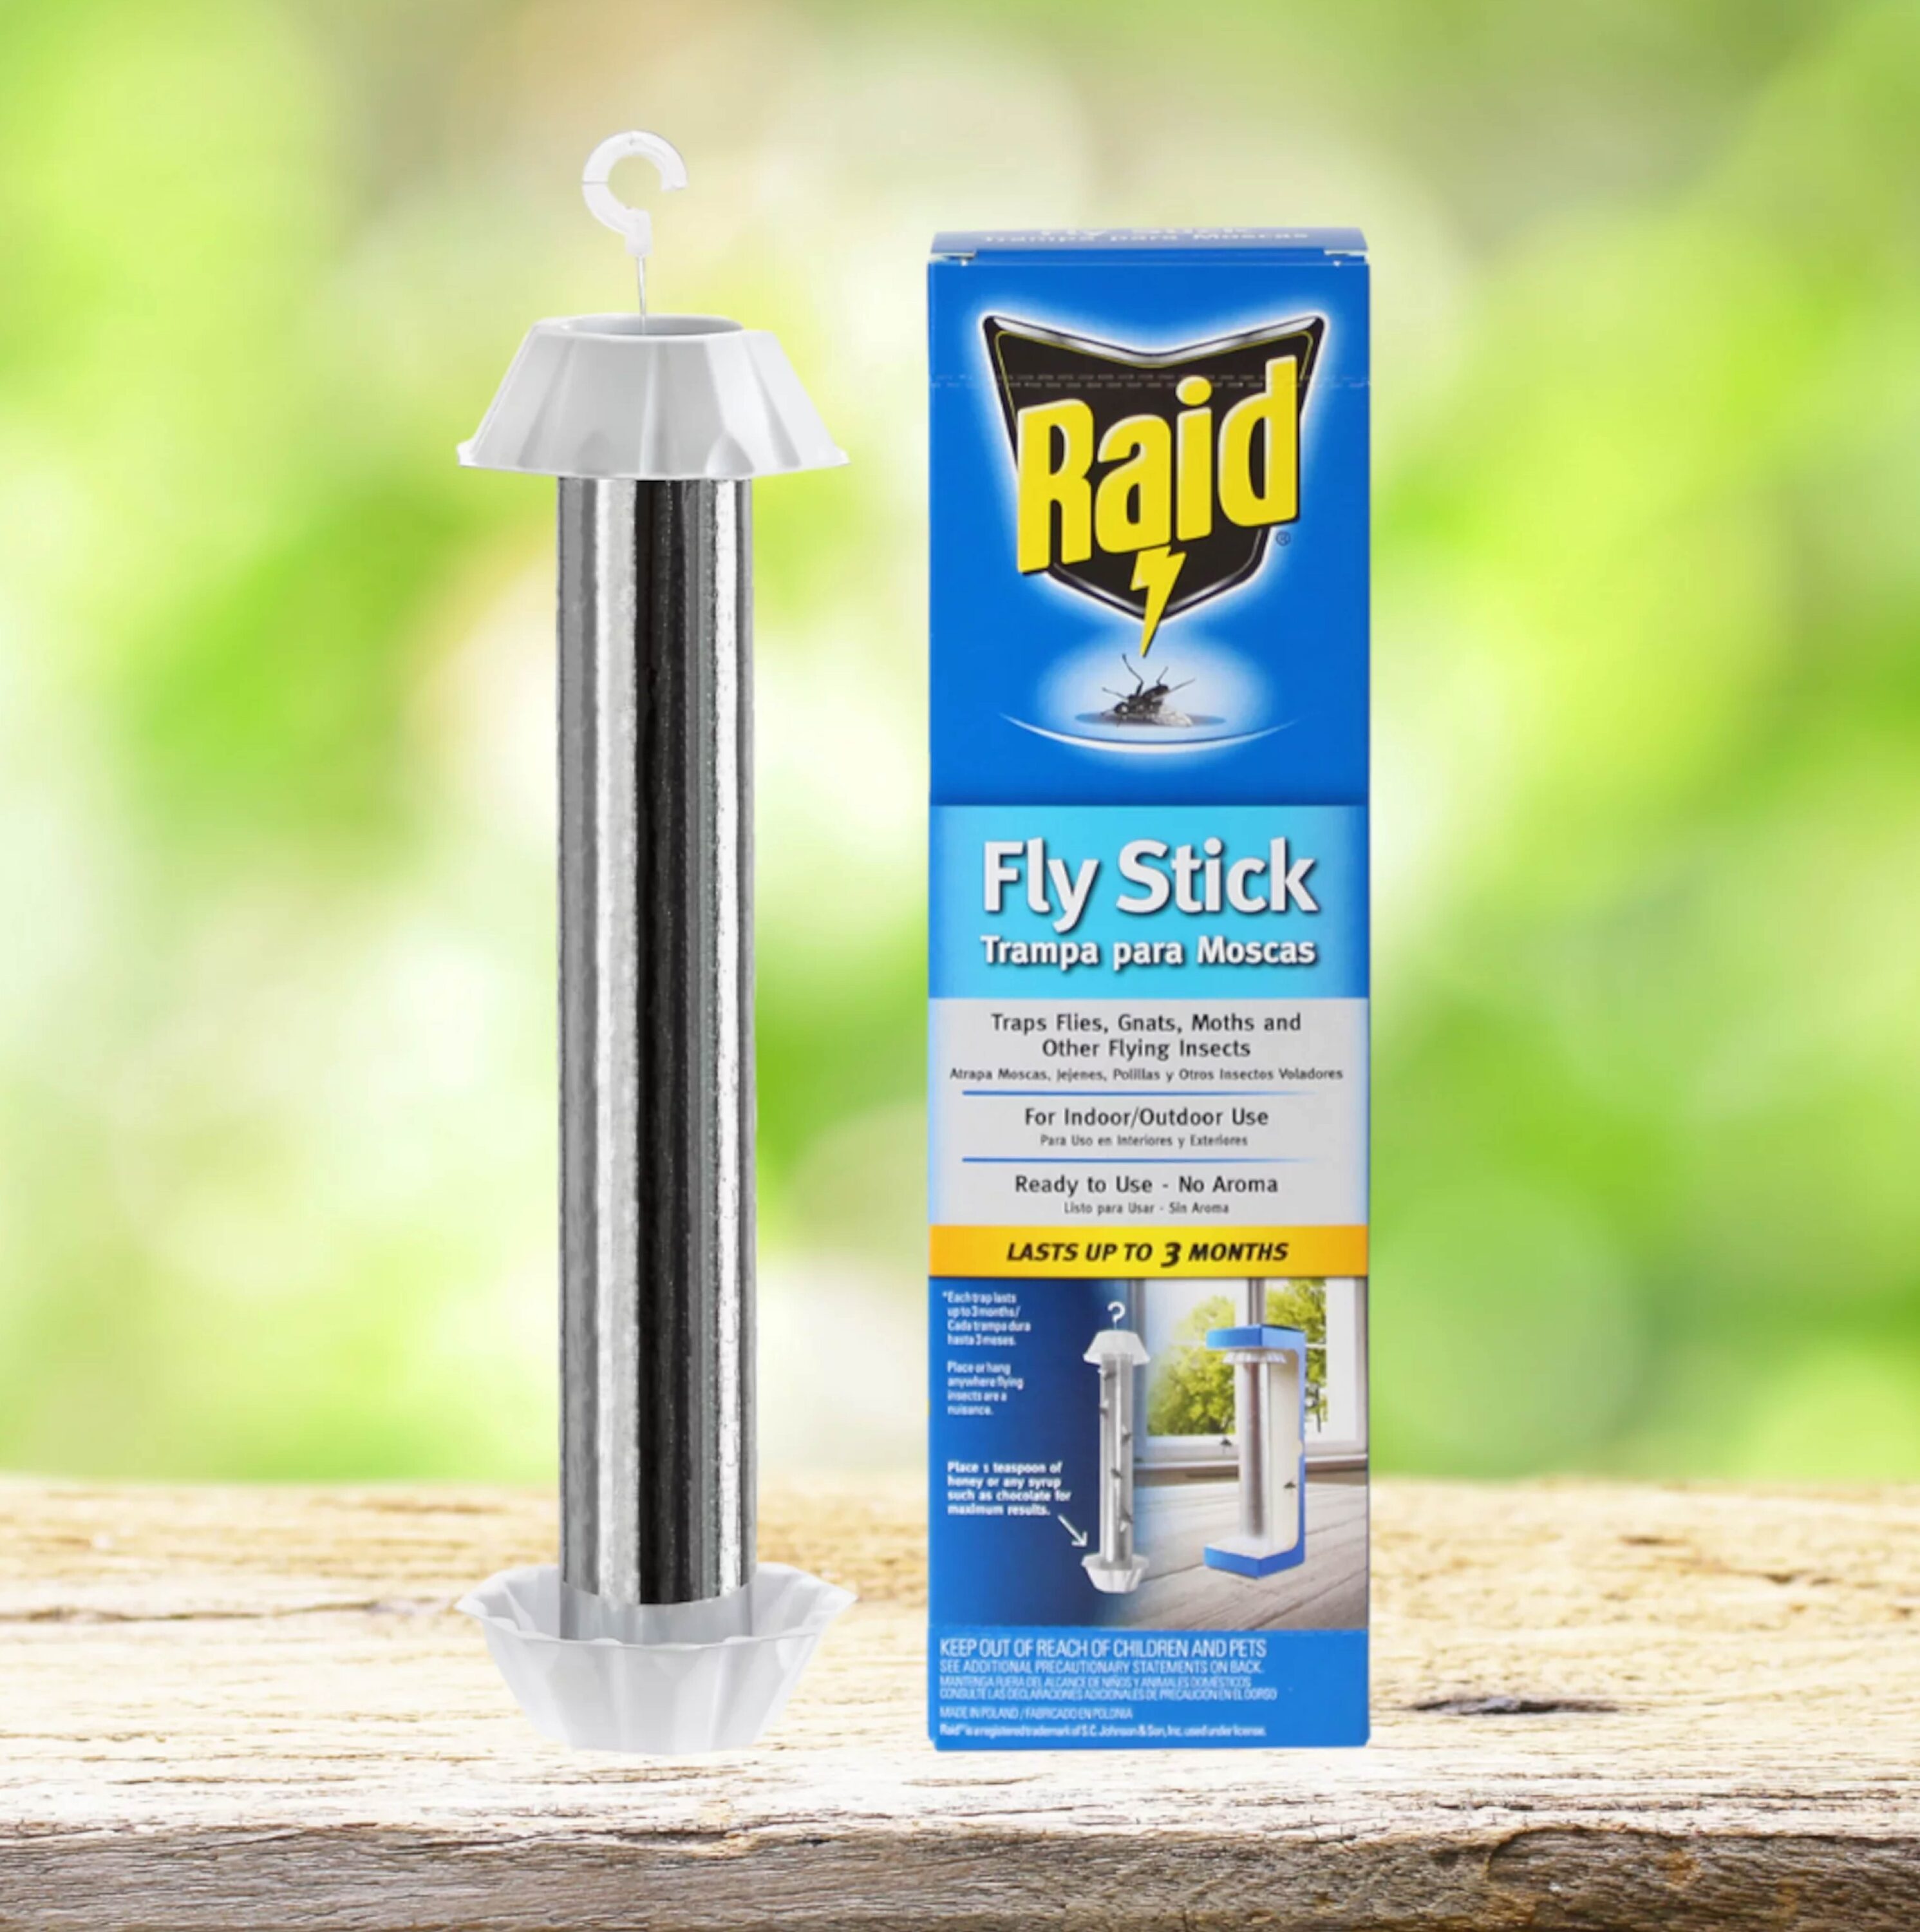 8pk Sticky Fly Papers for Indoors & Outdoor - Safe and Effective